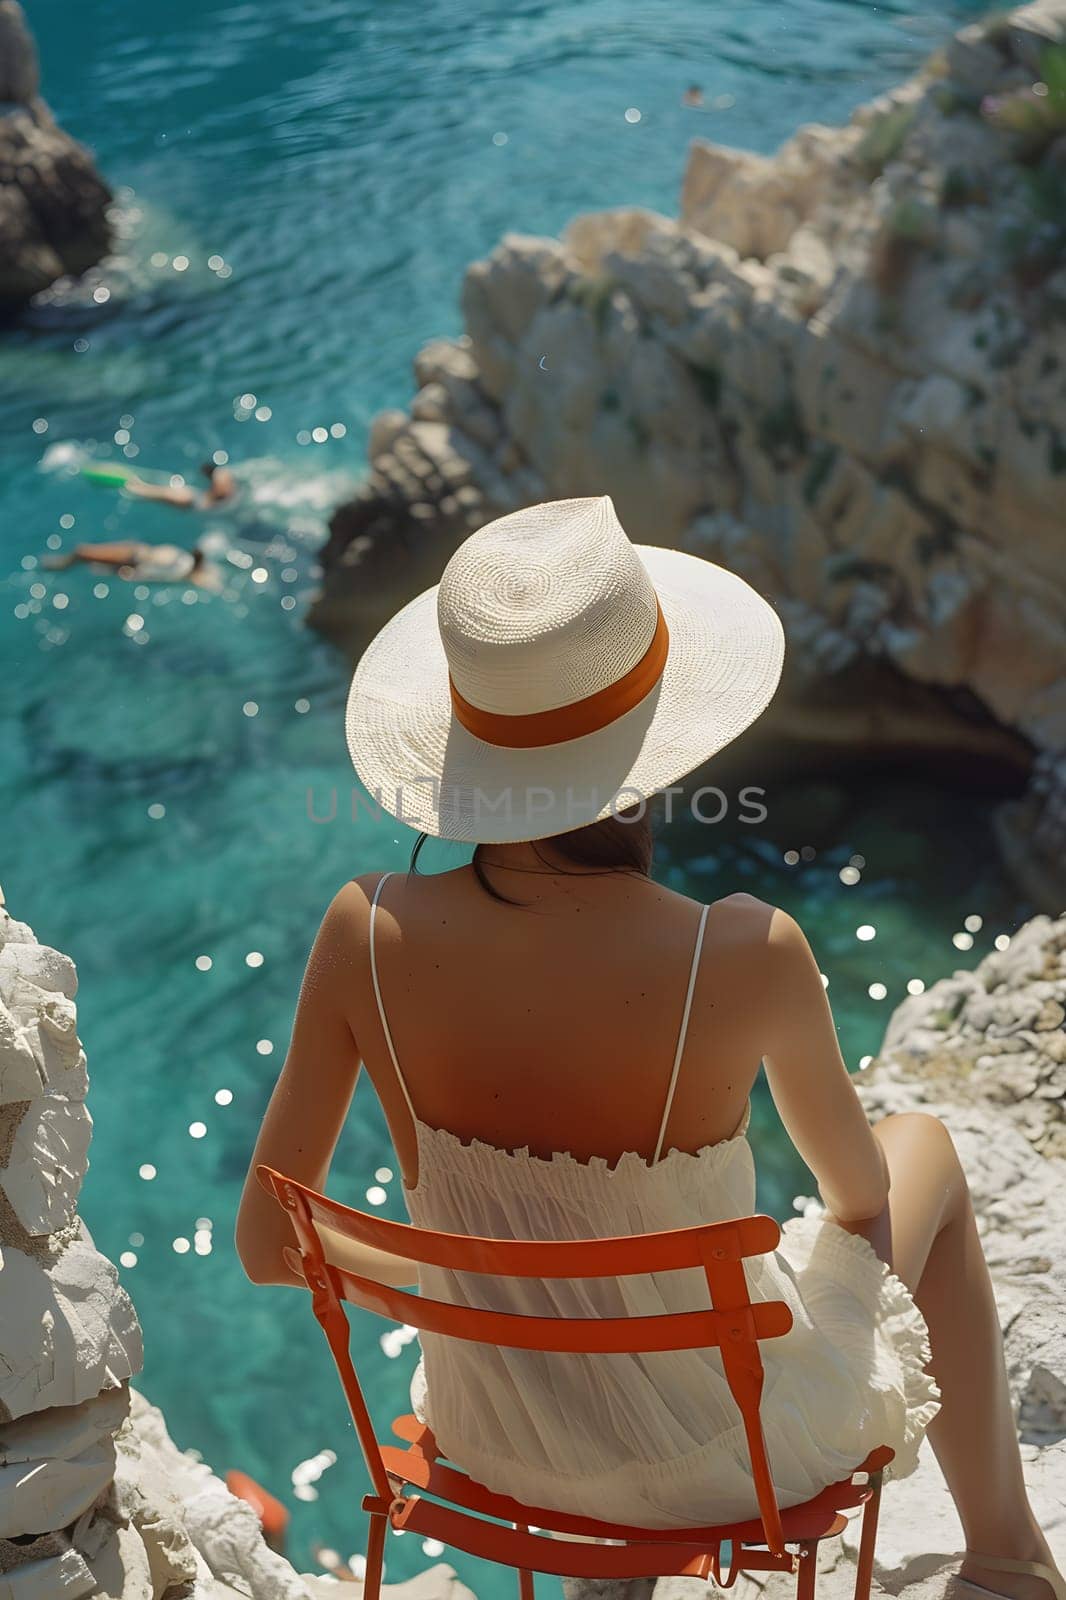 A woman in a sun hat is seated on a chair enjoying the azure waters of the ocean. She is immersed in nature, traveling, and leisure during the summer season